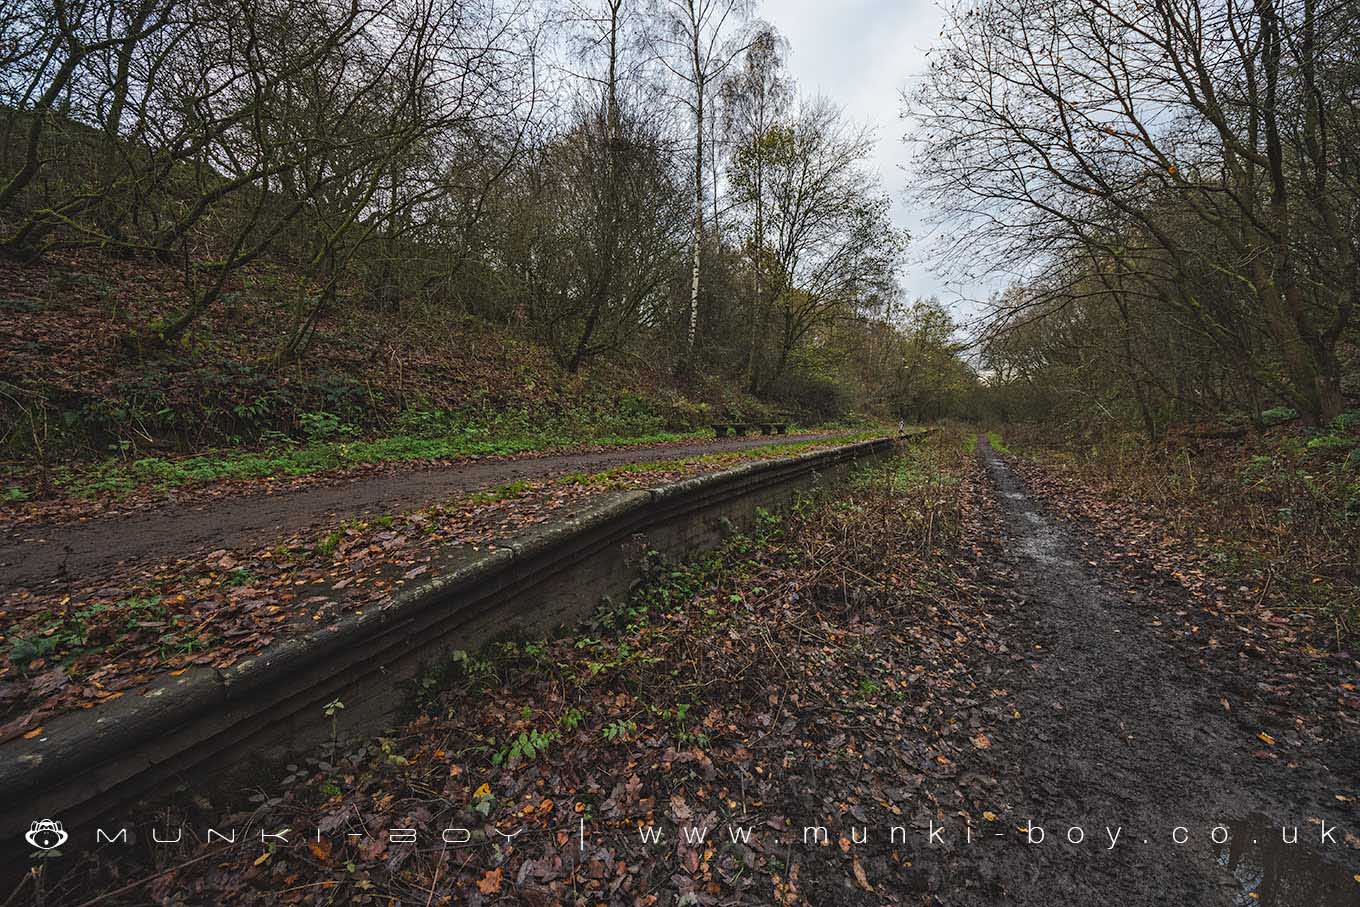 Disused Railway Lines in Outwood Country Park